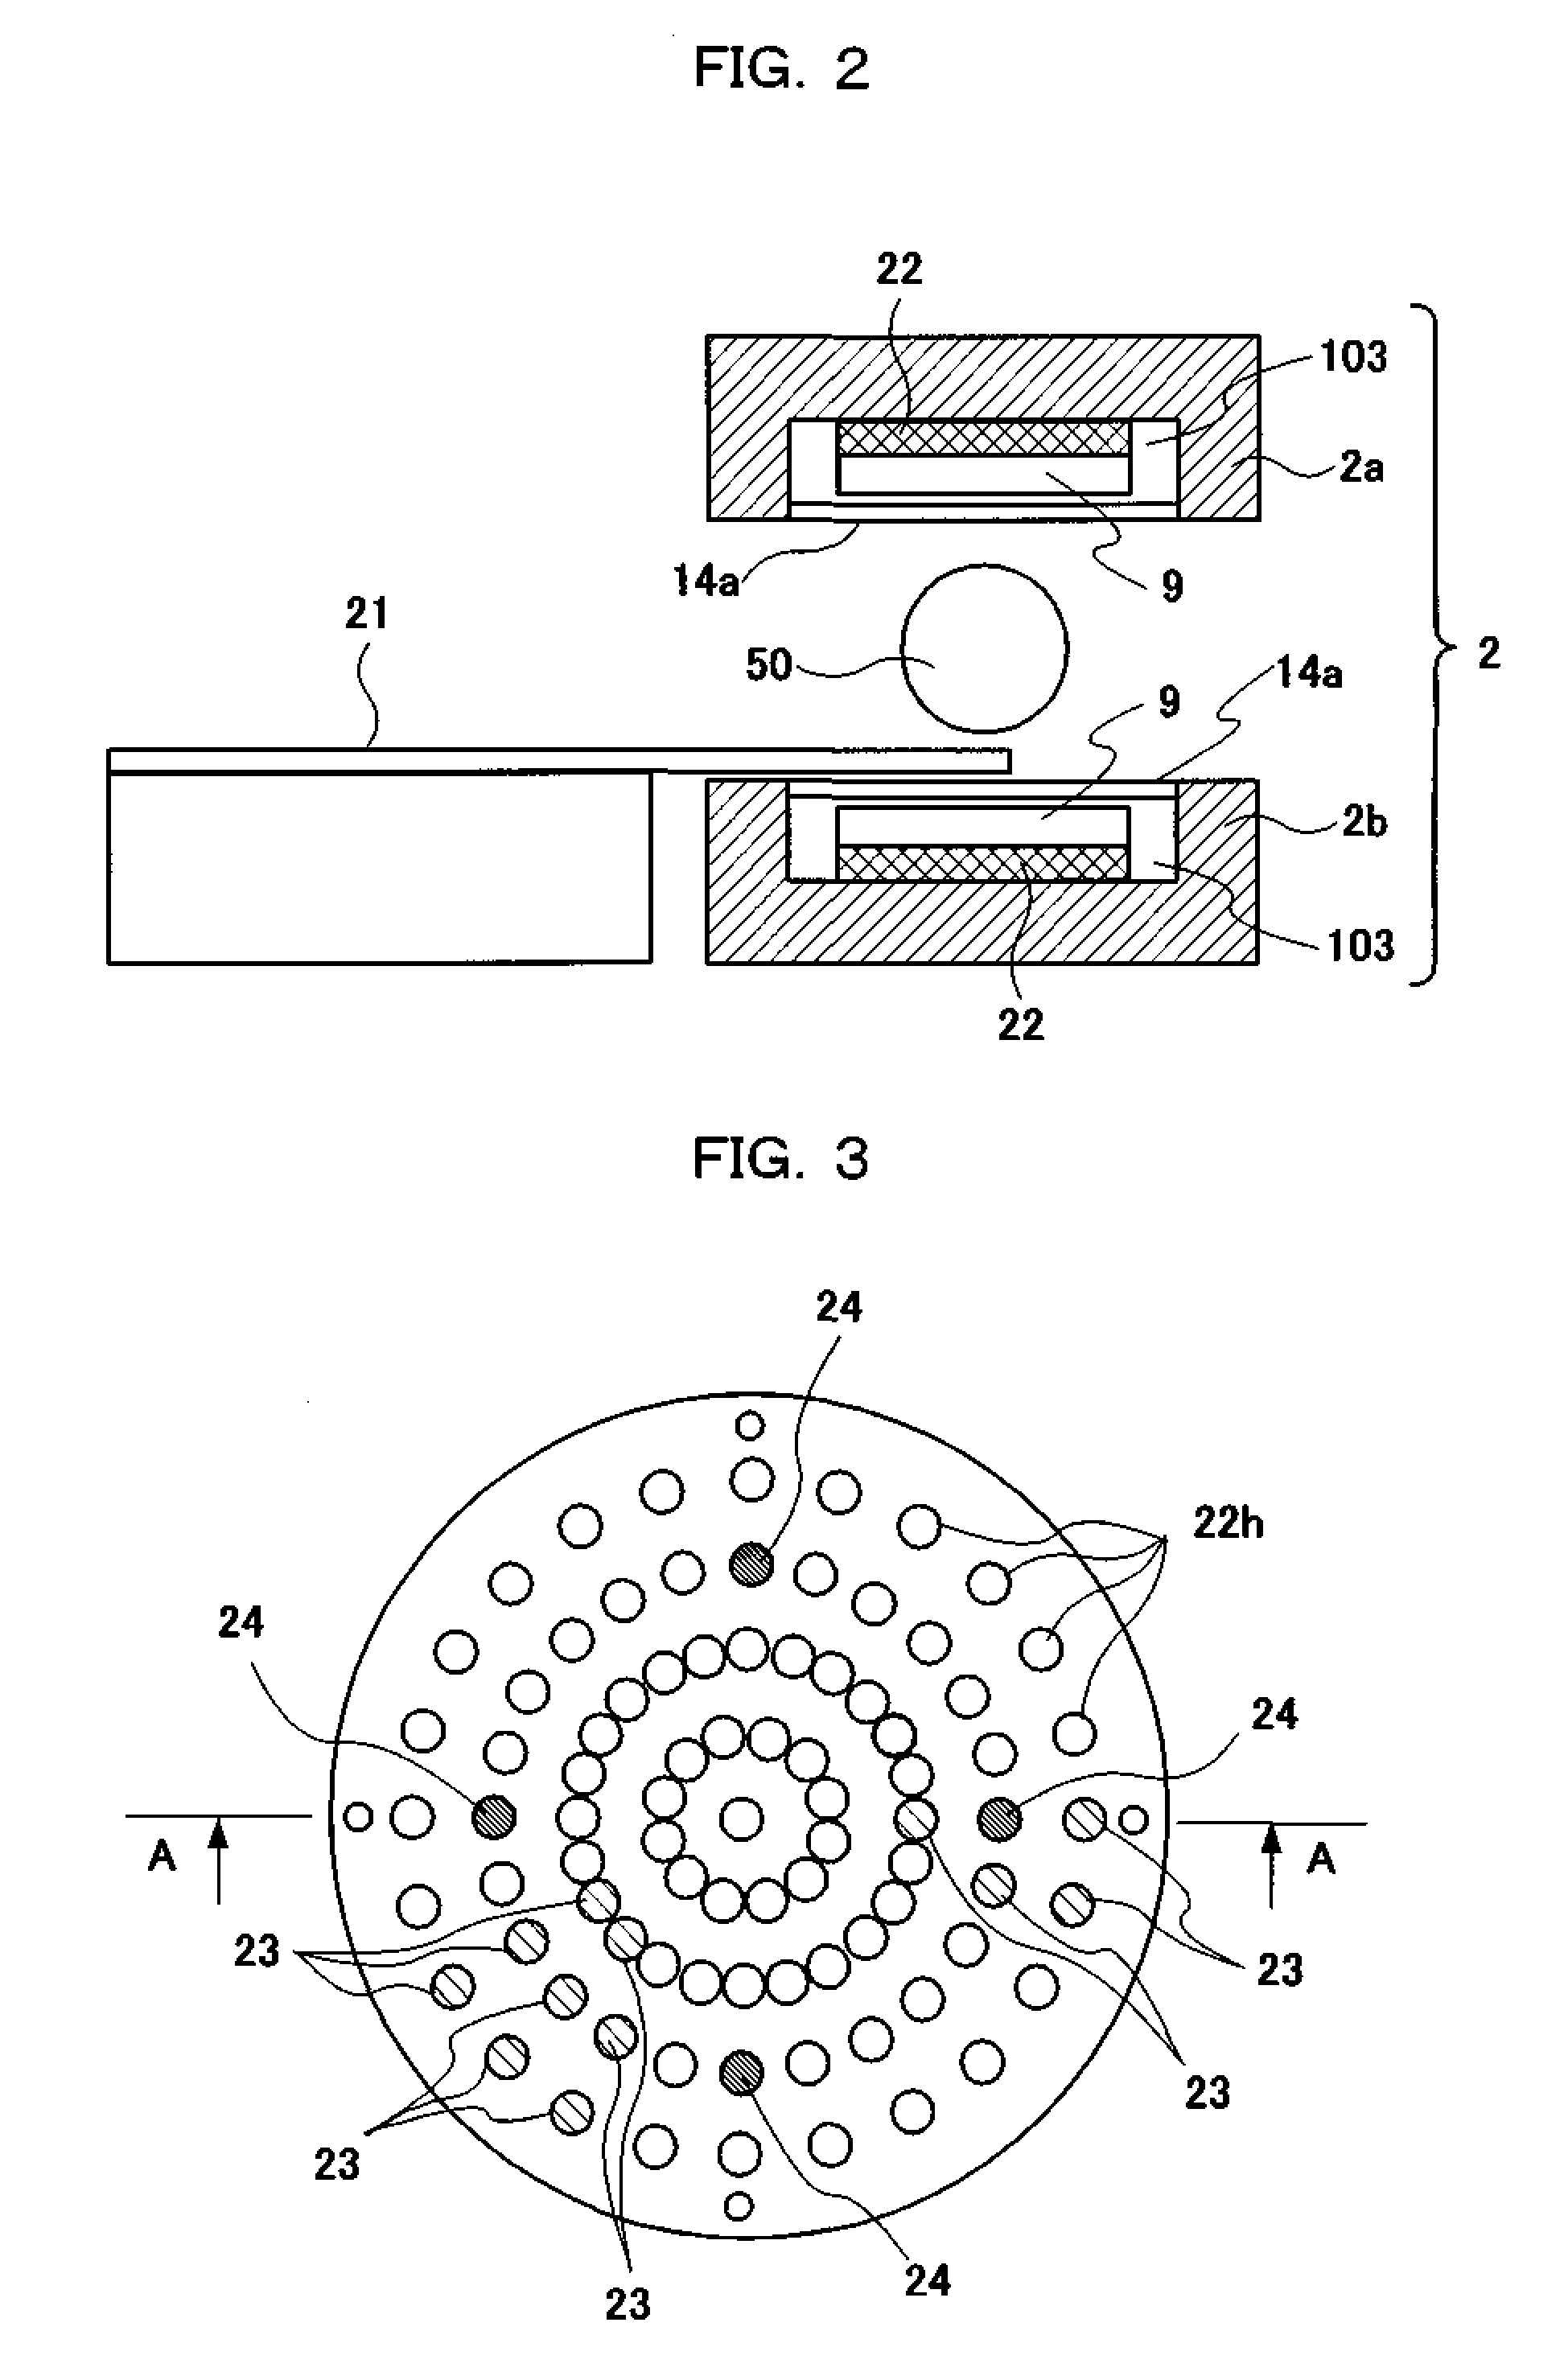 Structure for reducing noise in magnetic resonance imaging apparatus